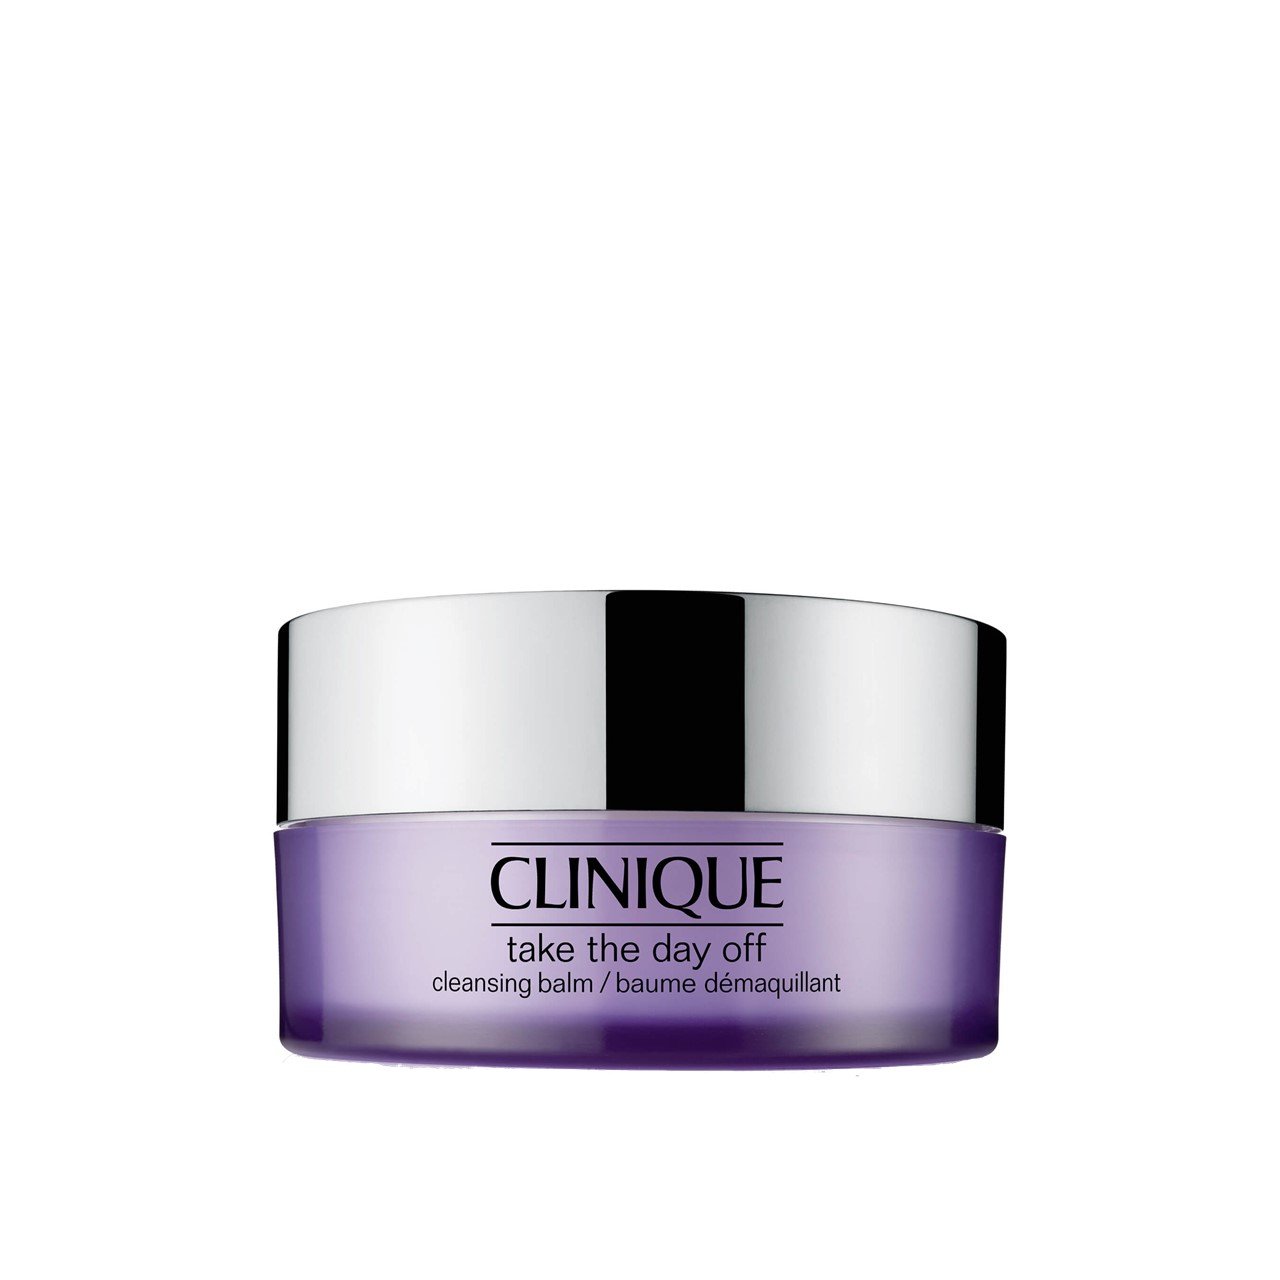 Clinique Take The Day Off Cleansing Balm 125ml (4.23fl oz)